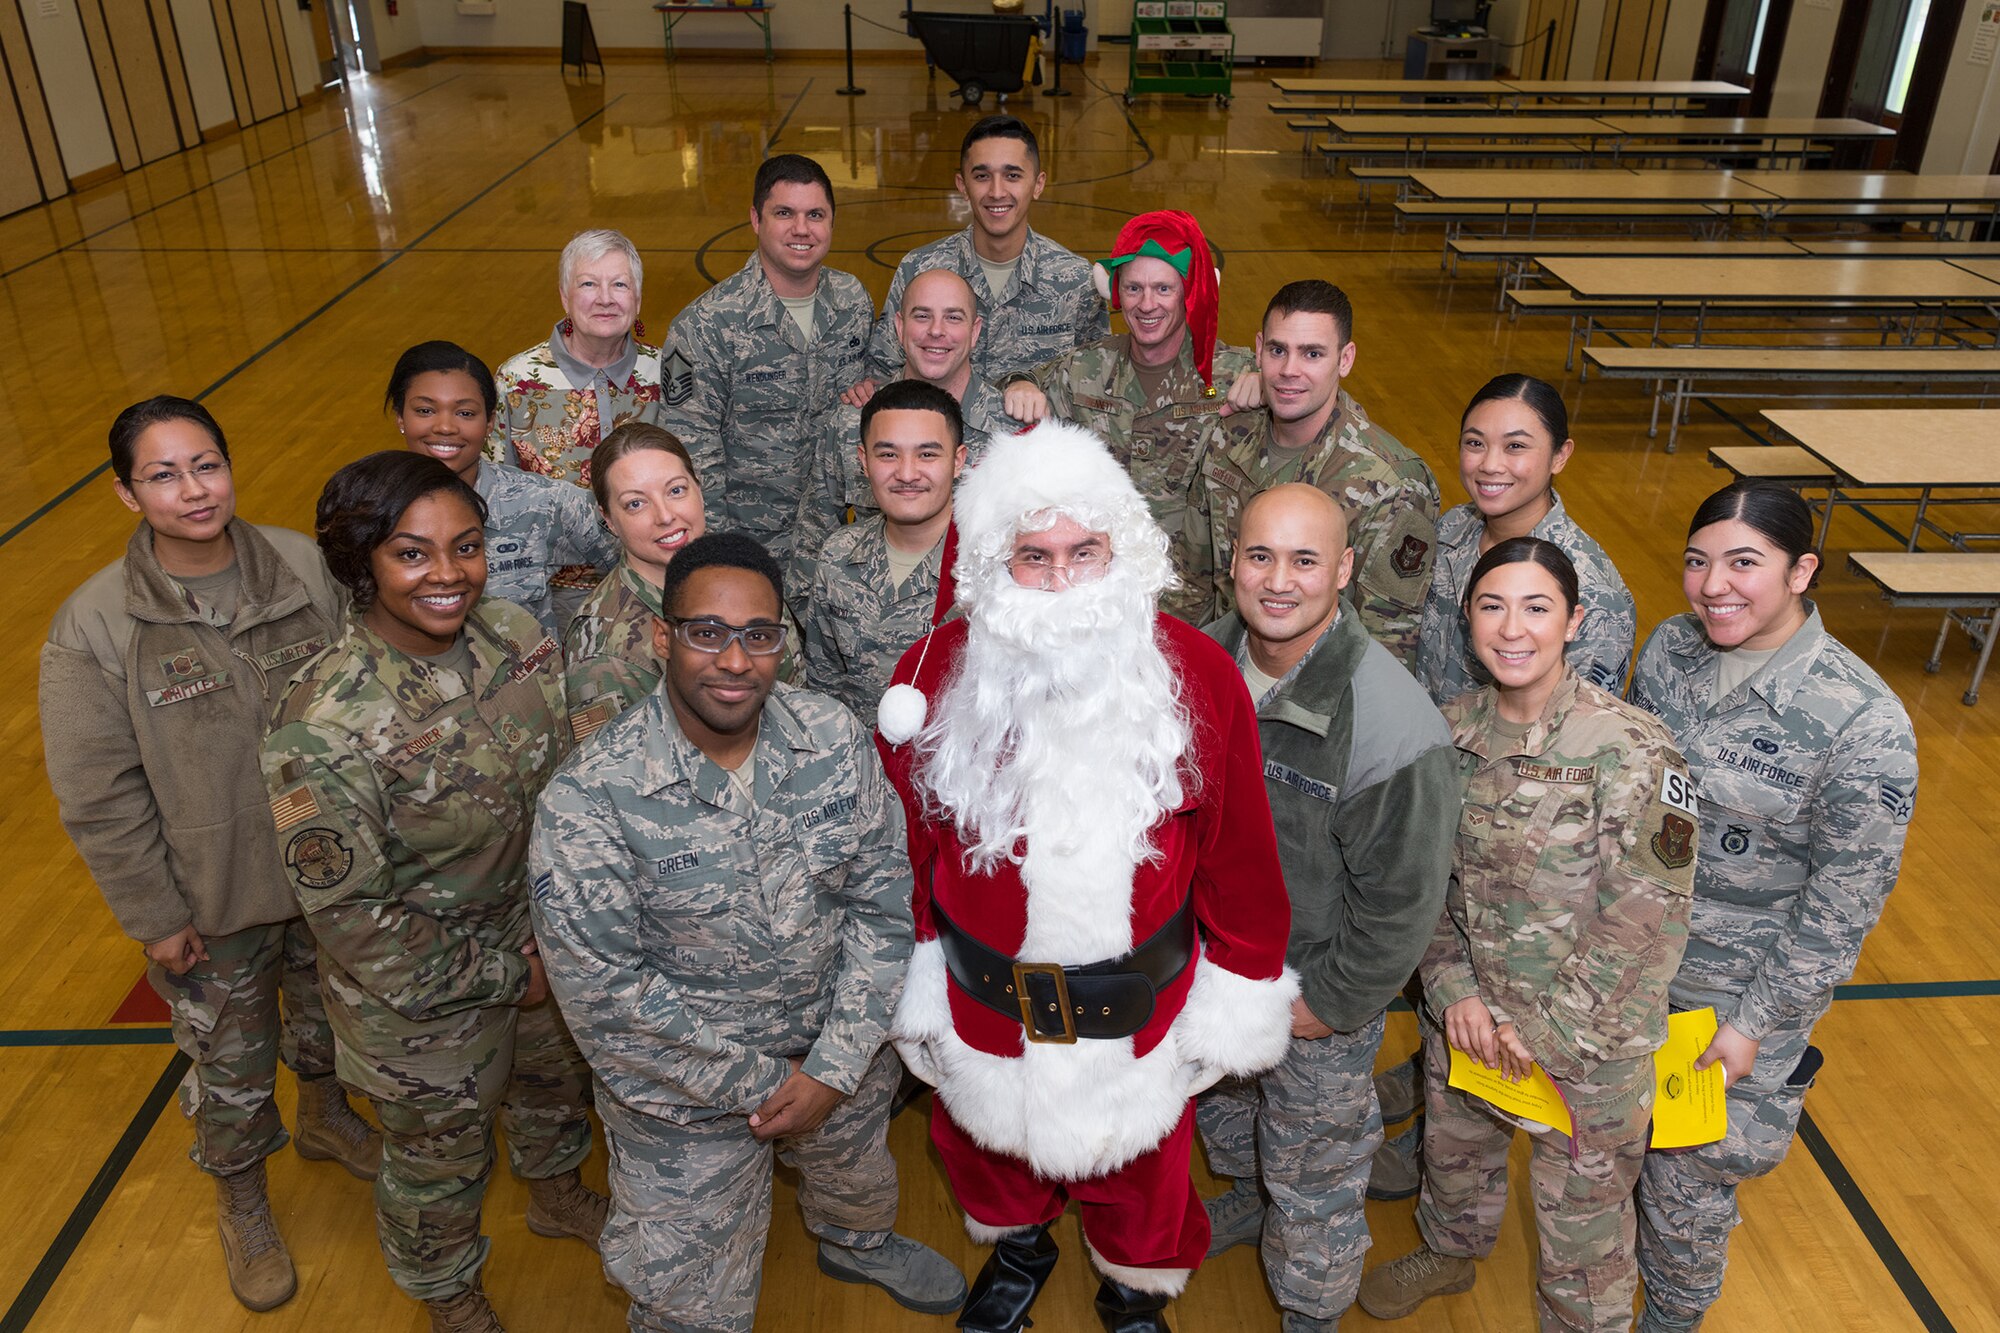 Members of the 349th Air Mobility Wing and Team Travis participated in Operation Teddy Bear this week, as they have for more than three decades.